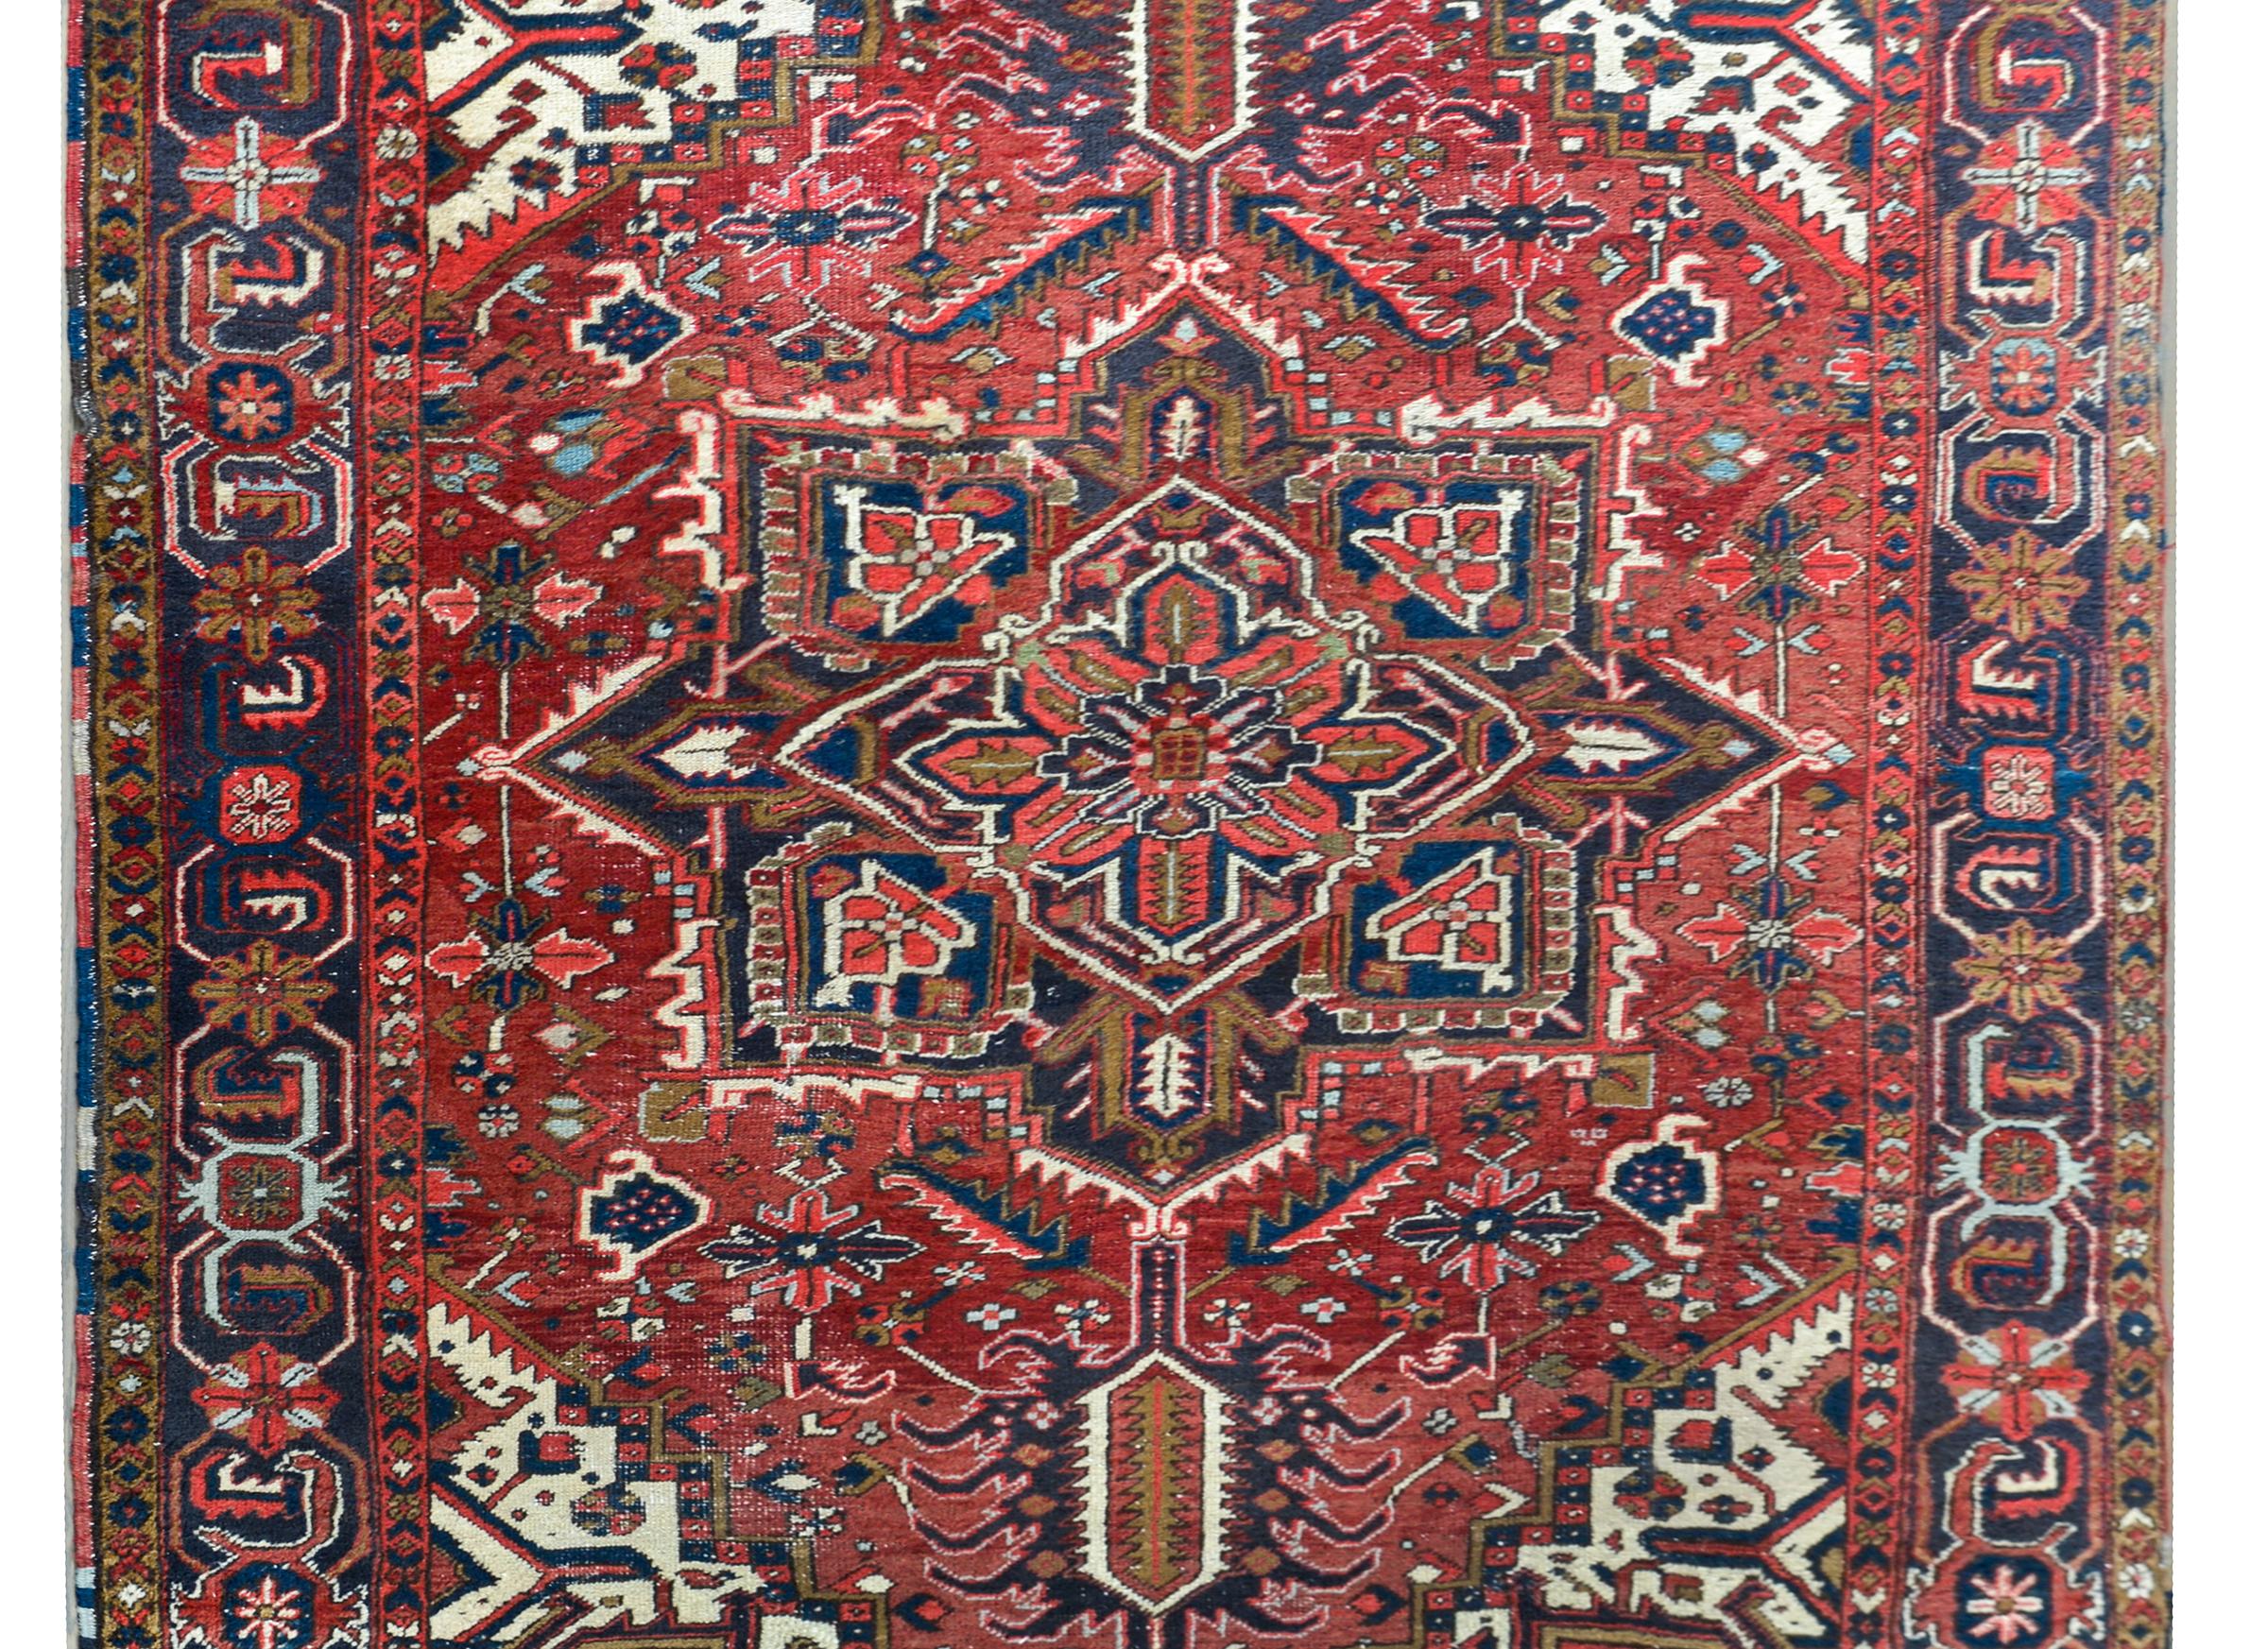 A striking early 20th century Persian Heriz rug with a large central eight-lobed floral medallion woven in myriad colors including coral, indigo, brown, pink, and white, and living amidst a field of more stylized flowers. The border is wonderful